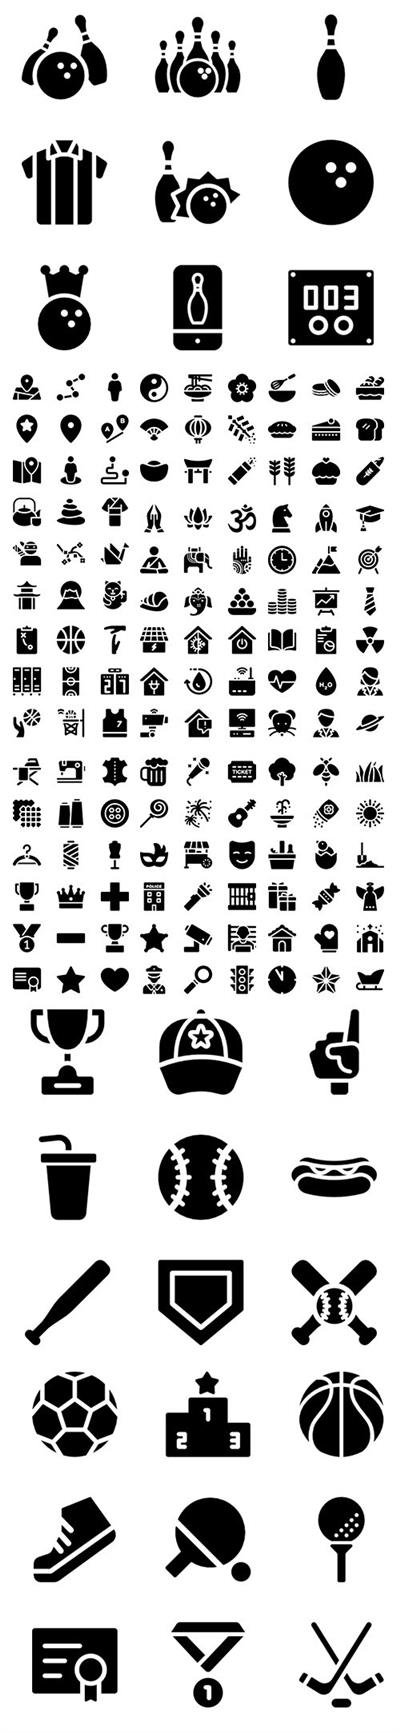 450+ Curved Fill Vector Icons Set